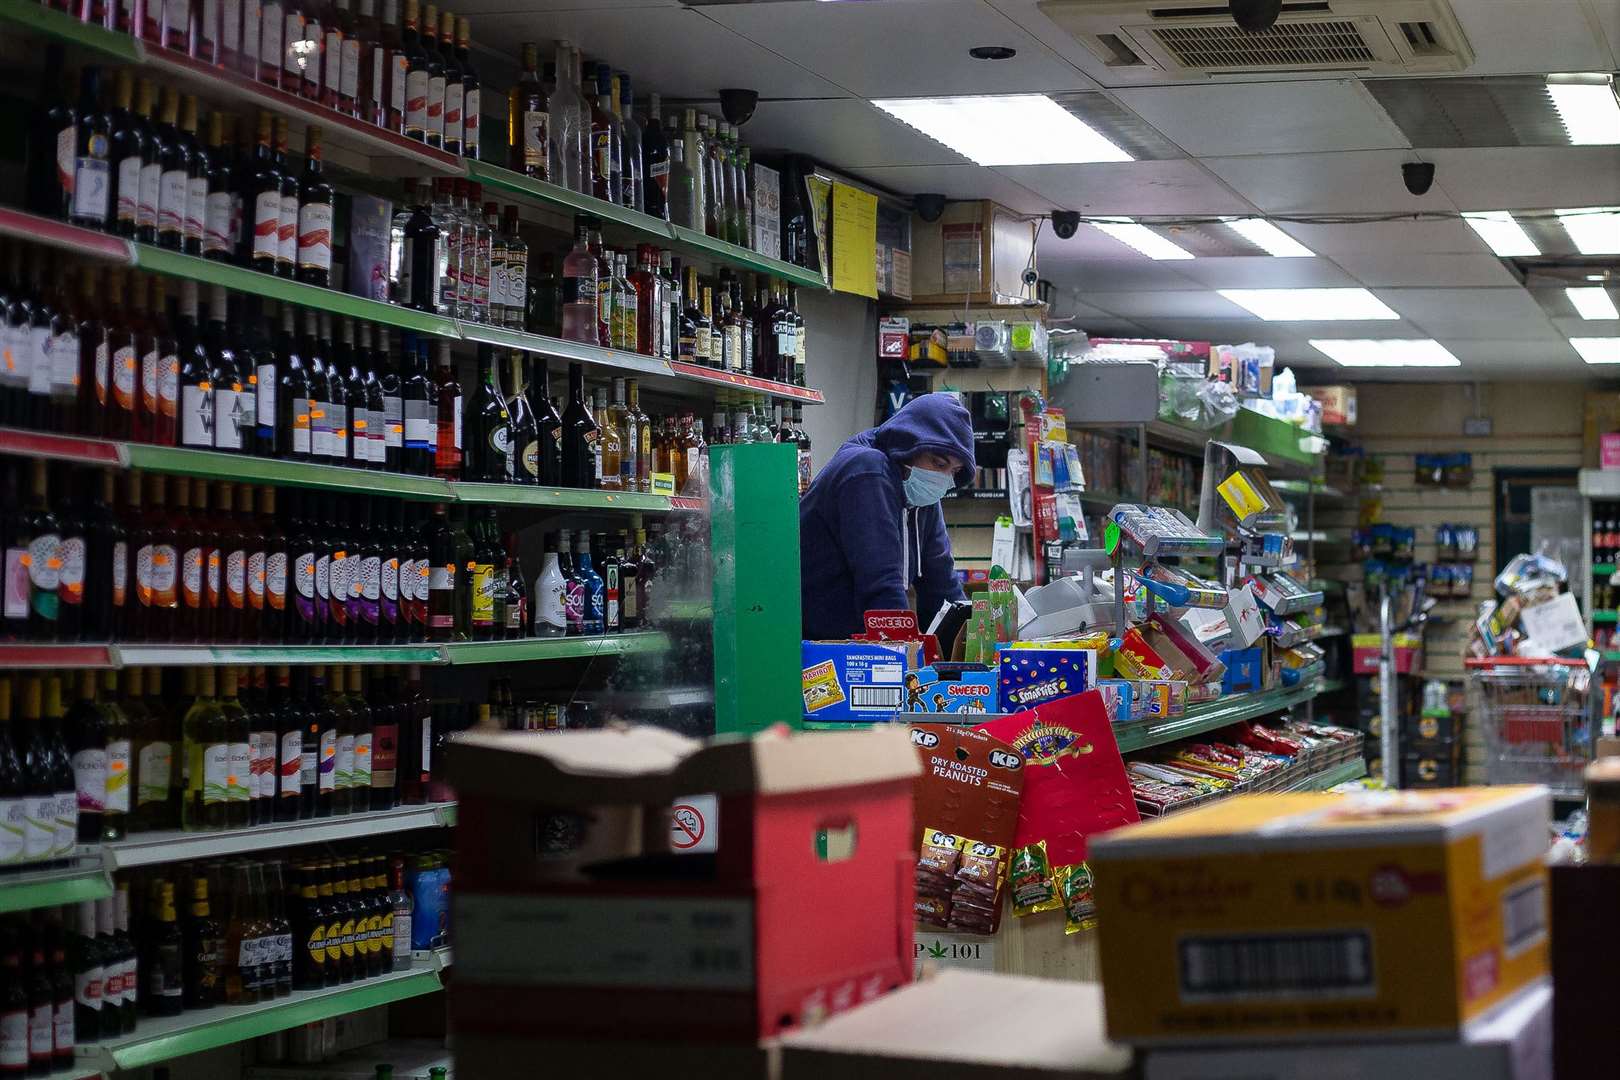 Worker, off licence by Gemma Mancinelli from London (Gemma Mancinelli/Historic England/PA)